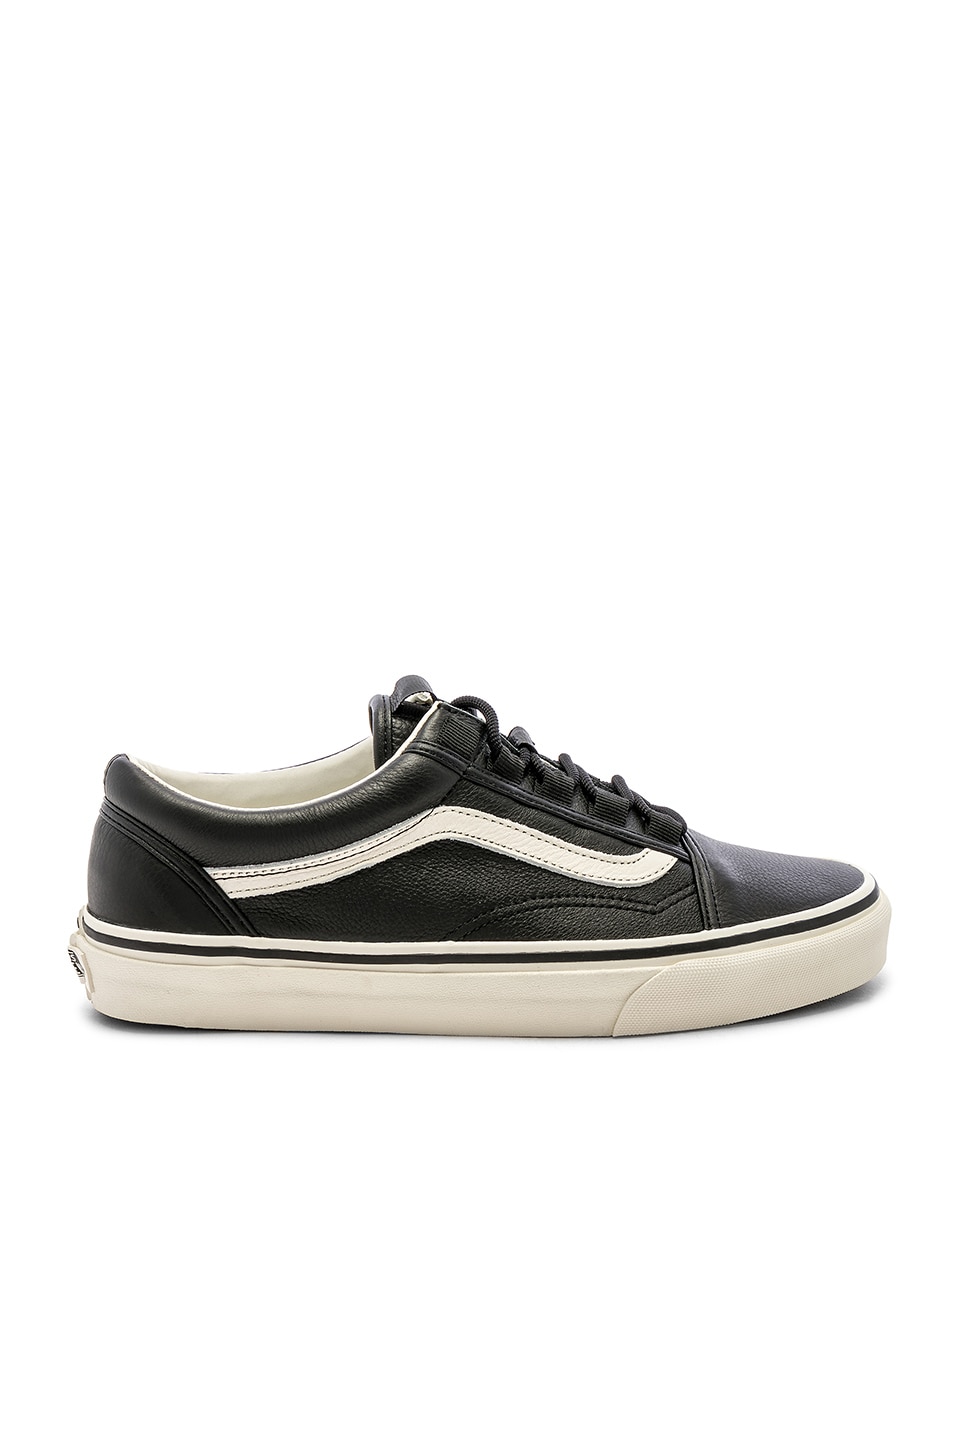 leather old skool ghillie cheap online